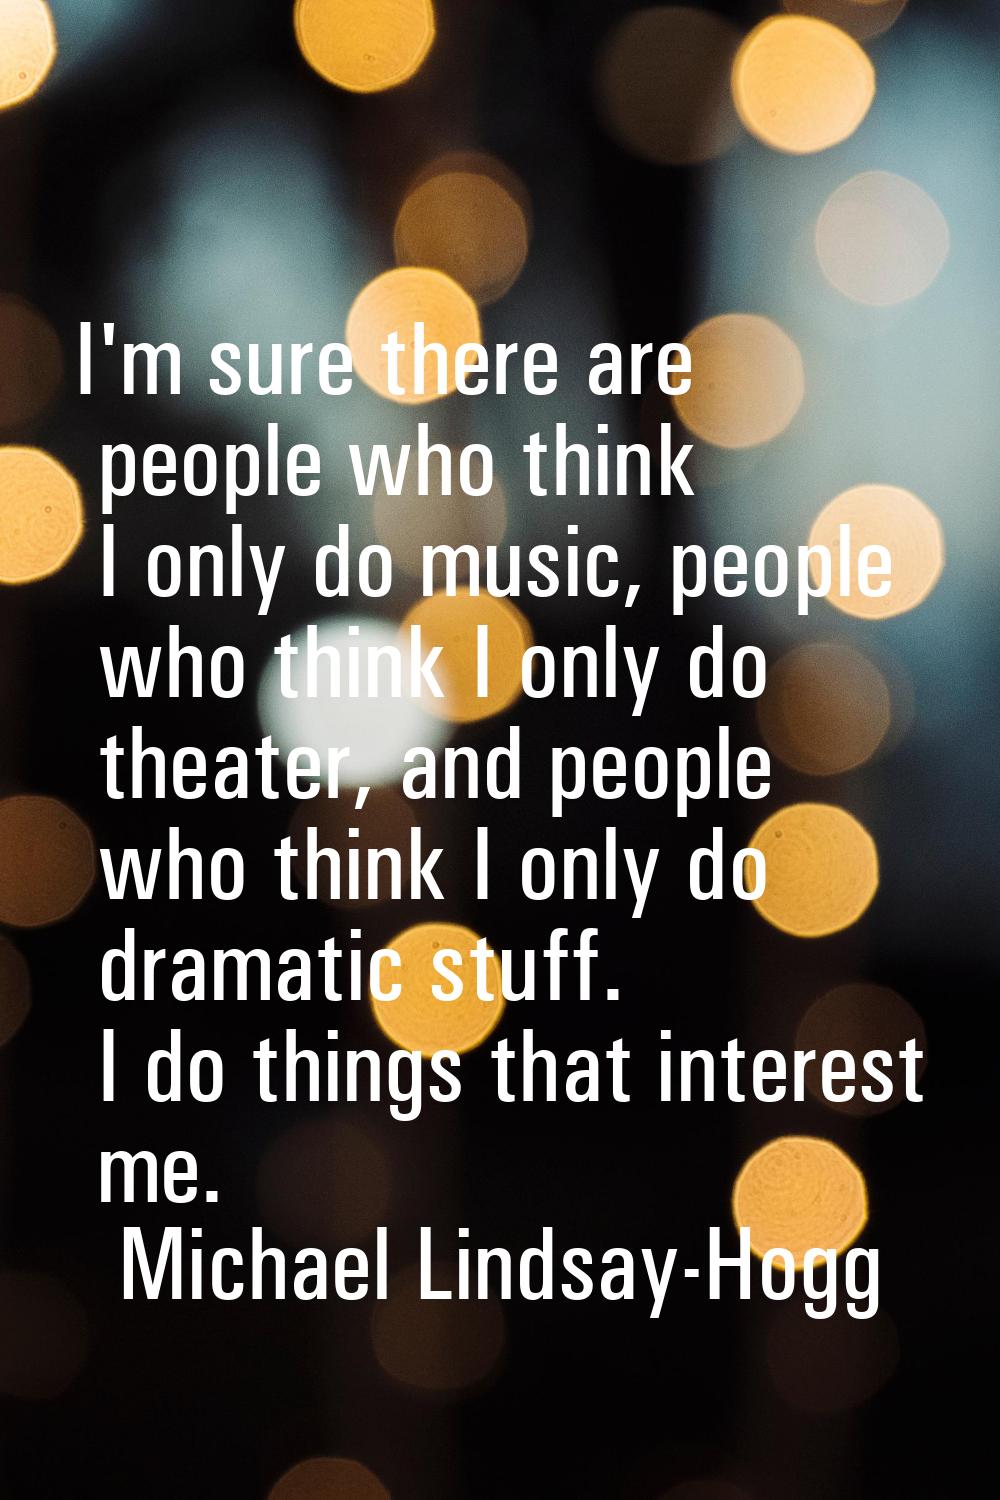 I'm sure there are people who think I only do music, people who think I only do theater, and people